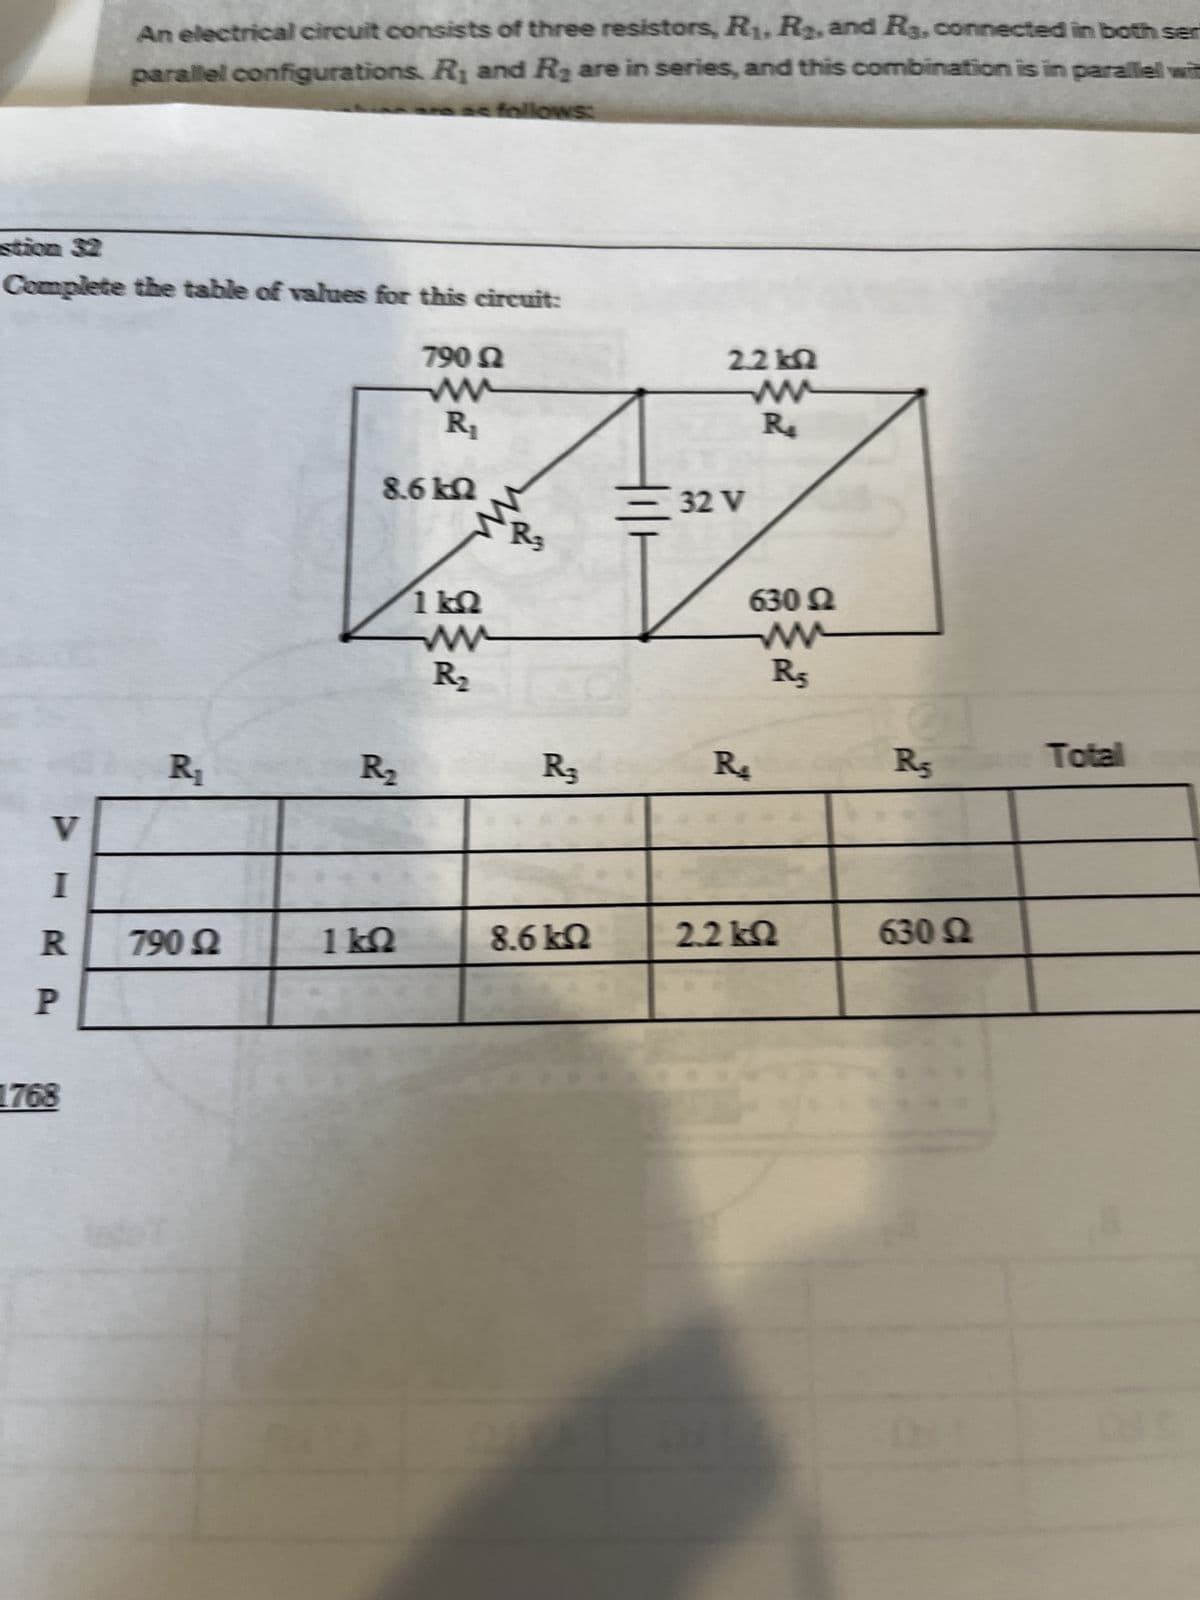 Complete the table of values for this circuit:
V
I
R
P
An electrical circuit consists of three resistors, R₁, R₂, and R3, connected in both ser
parallel configurations. R₁ and R₂ are in series, and this combination is in parallel wit
follows:
1768
R₁
790 92
790 9
ww
R₁
8.6 kQ
1kQ
1kQ
www
R₂
R₁
R3
8.6 ΚΩ
2.2kQ
ww
R₂
32 V
630 2
ww
R5
R₂
2.2kQ
R5
630 92
Totall